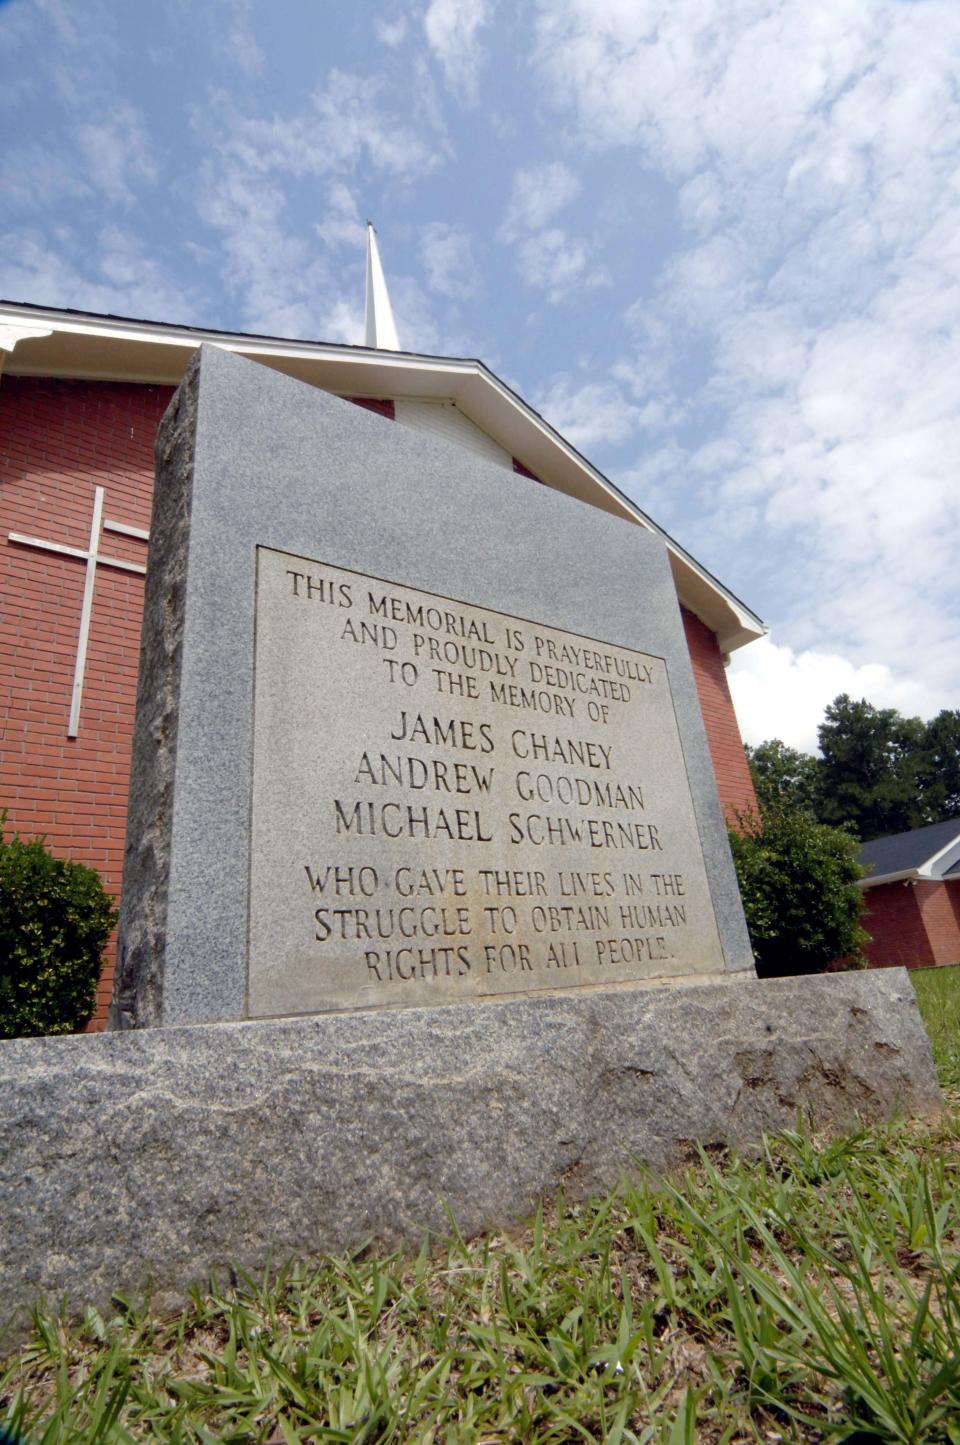 <p>A stone outside the Mt. Zion United Methodist Church memorializes three men, James Chaney, Michael Schwerner and Andrew Goodman June 10, 2005 in Philadelphia, Mississippi. The men were sent to investigate a fire at the church and beatings of church members by Klansmen. The men later disappeared and their bodies were discovered Aug. 4, 1964, in an earthen dam outside of Philadelphia. The case, which came to be known as Mississippi Burning, was said to have paved the way for the U.S. civil rights movement. (Photo: Marianne Todd/Getty Images) </p>